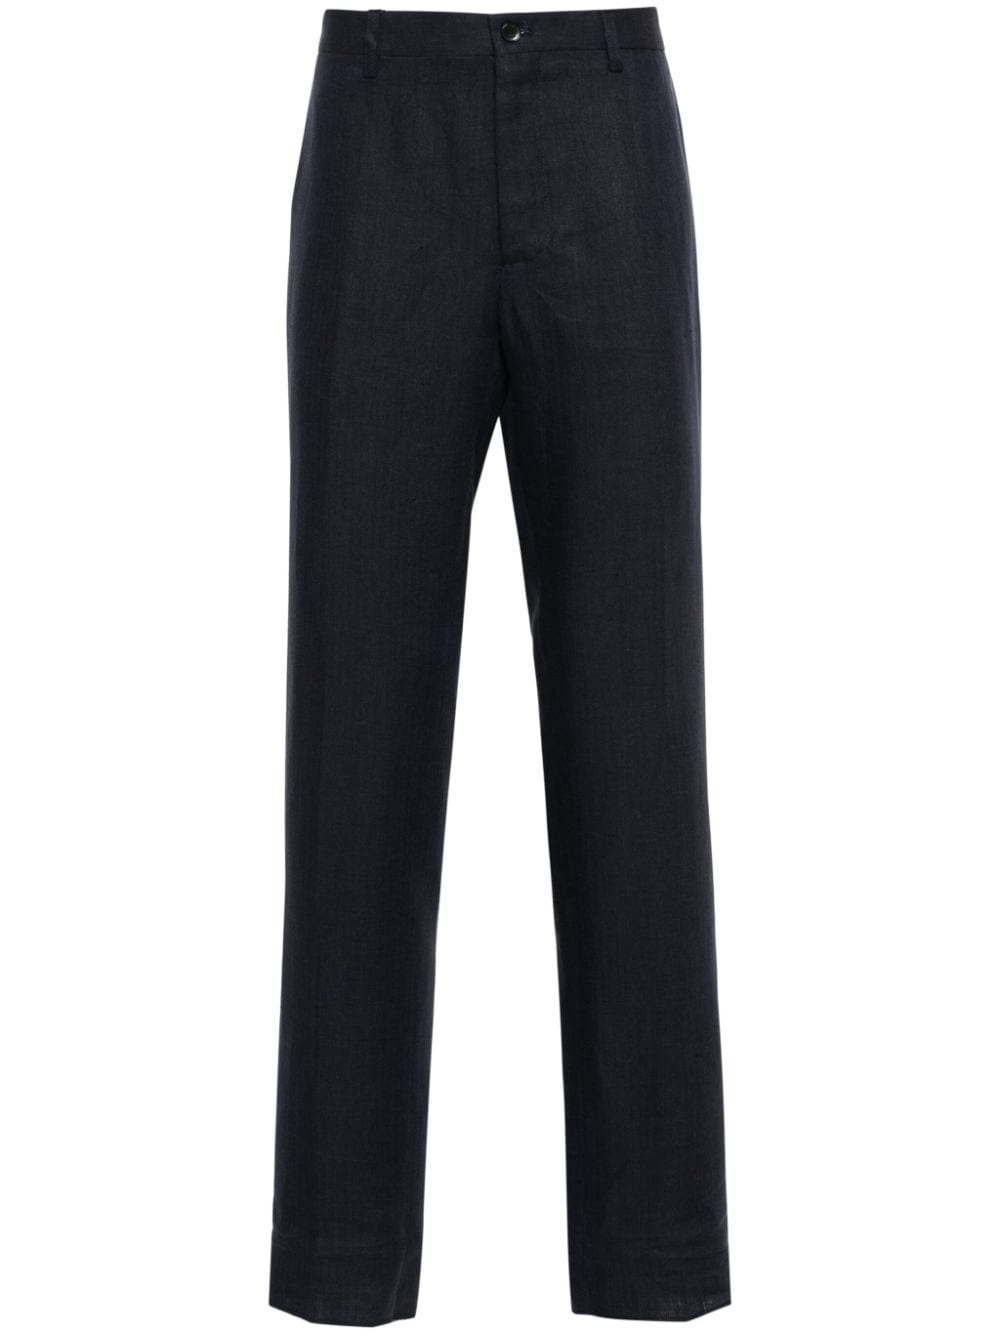 pressed-crease linen trousers - 1